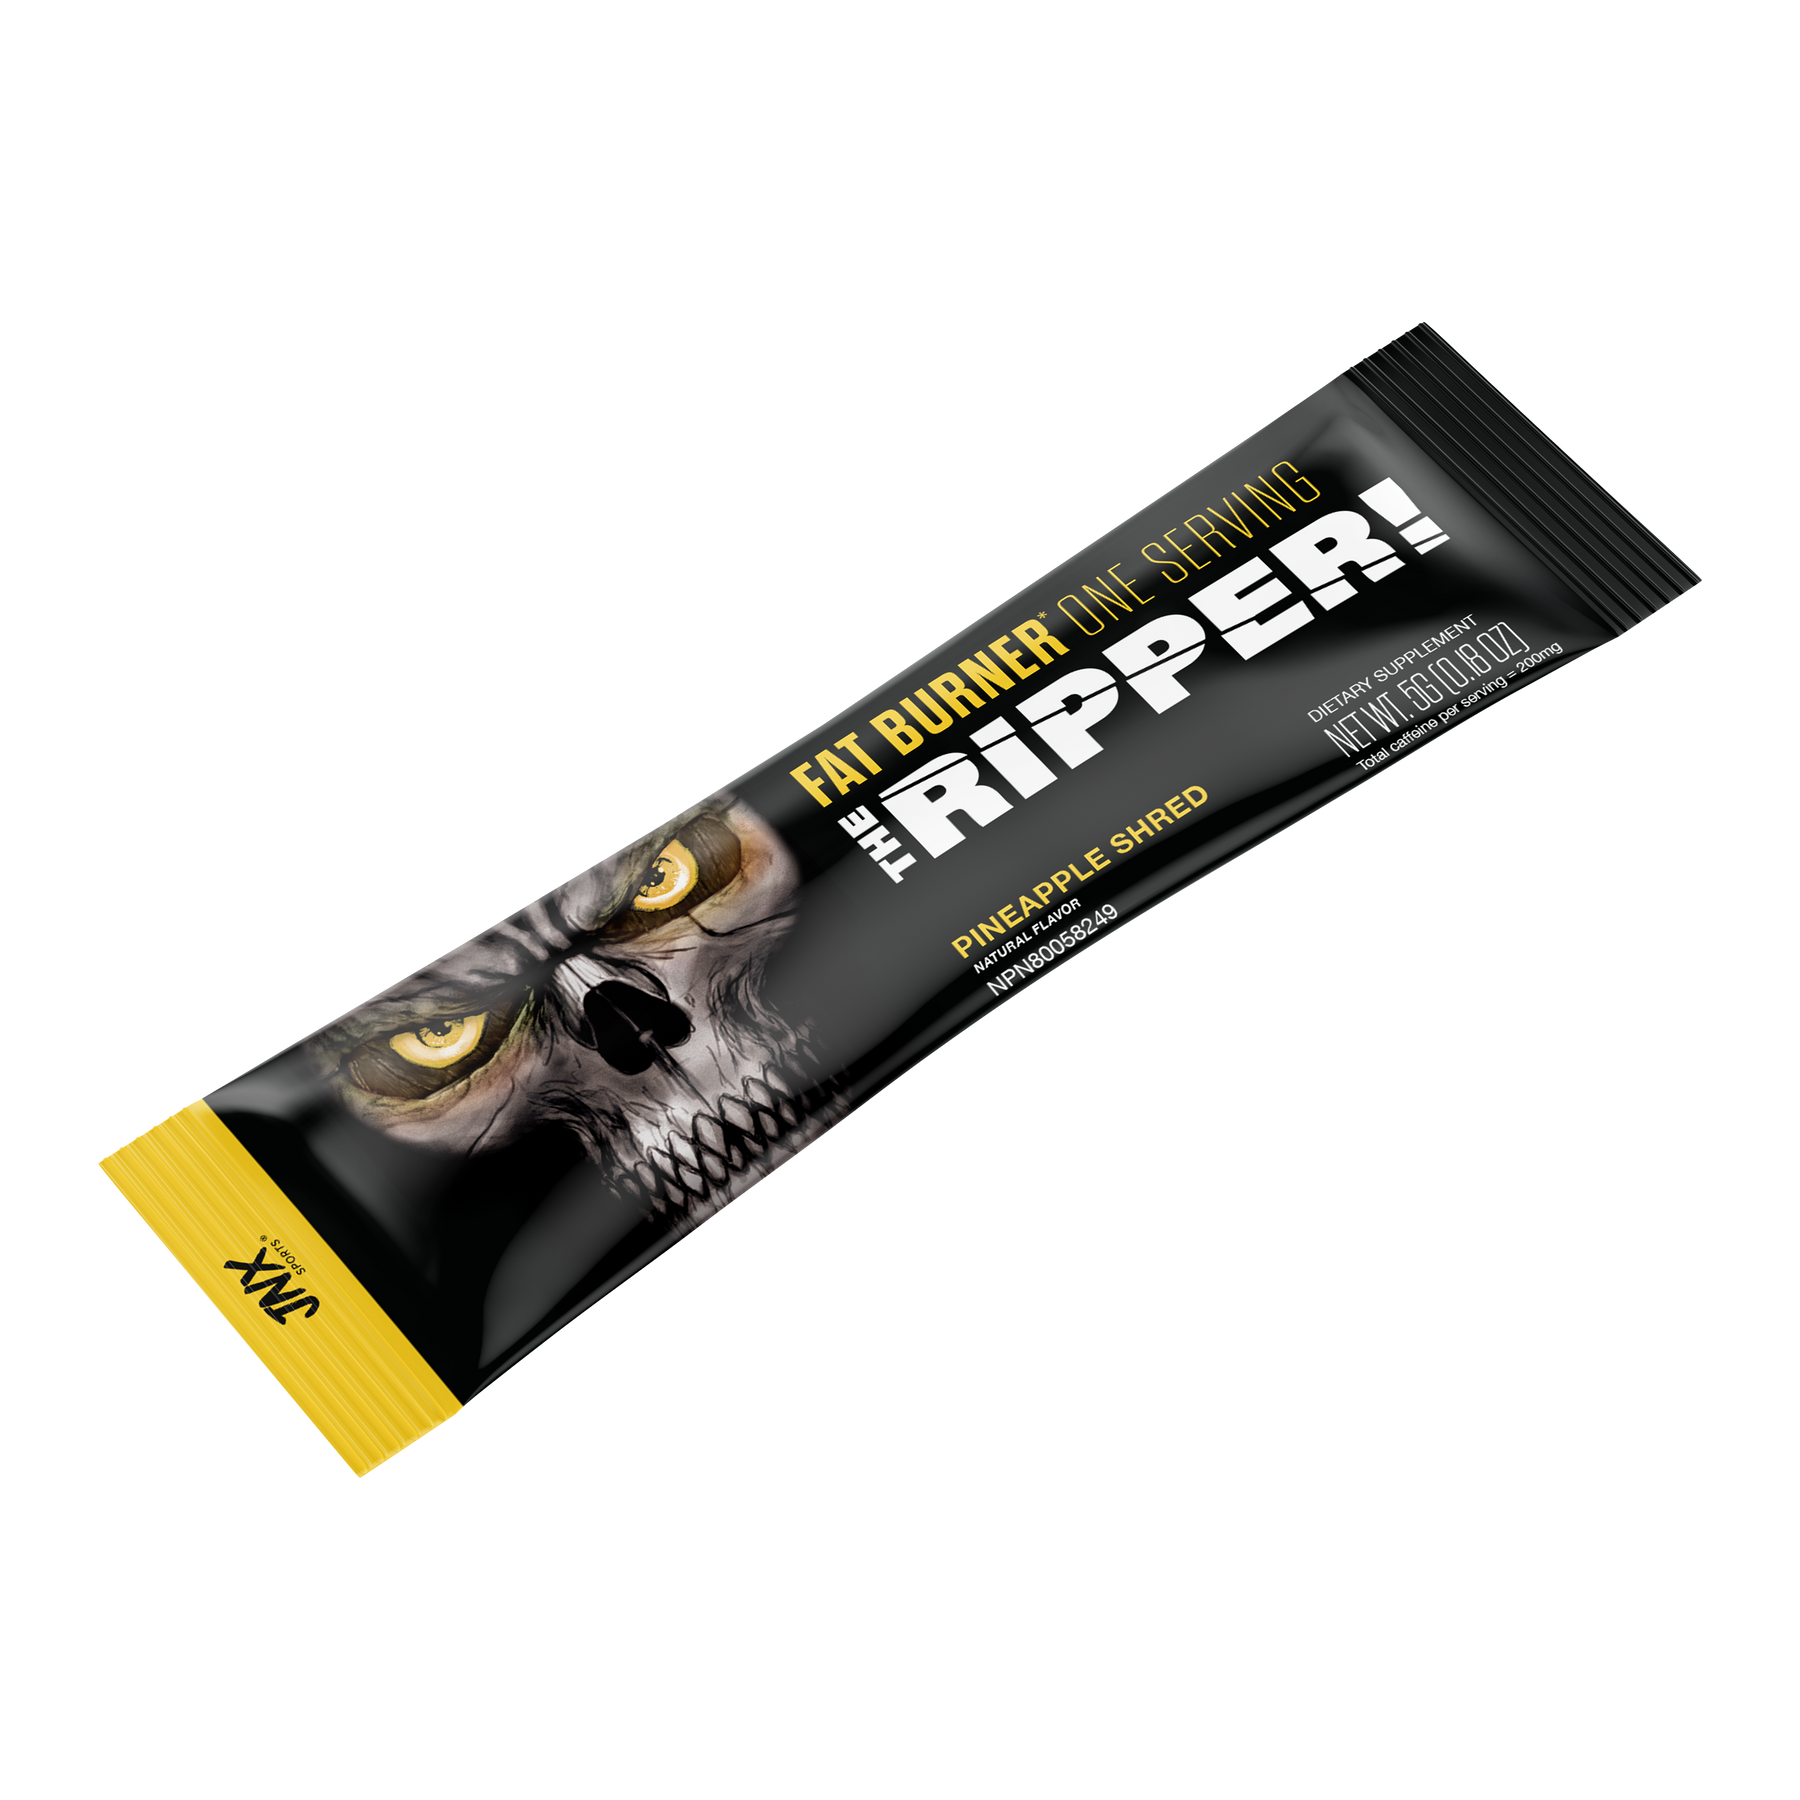 The Ripper! Fat Burner Variety Pack